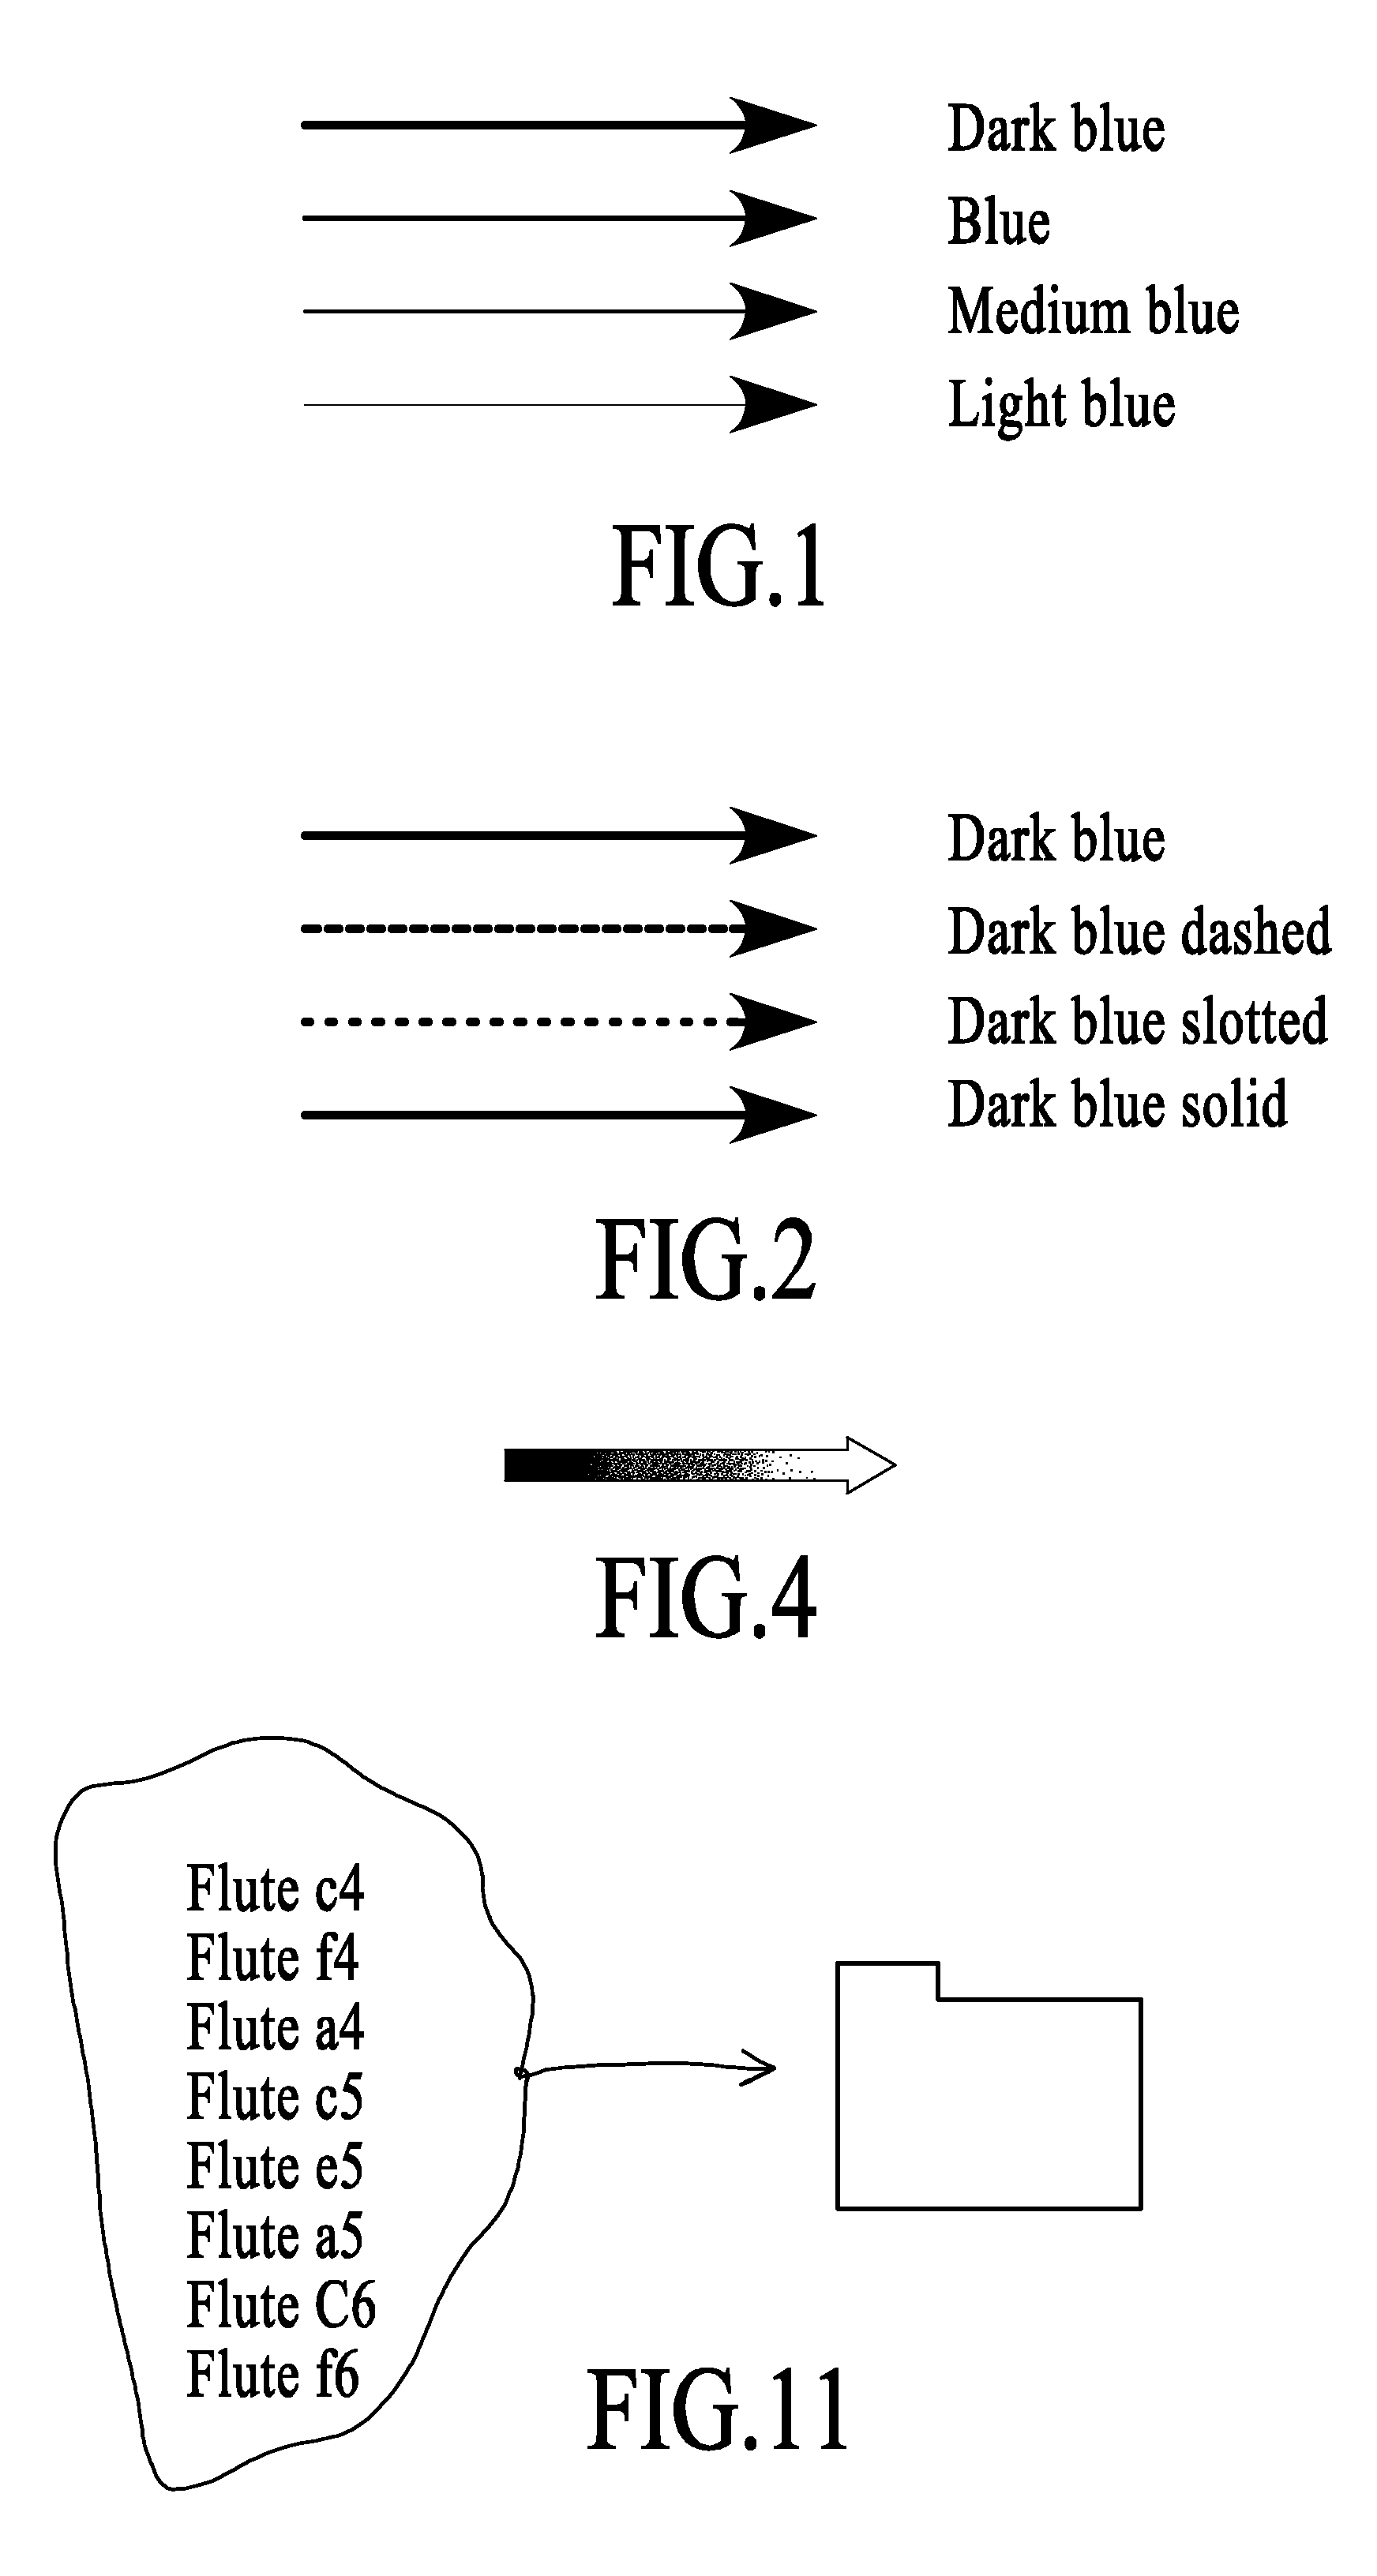 User-defined instruction methods for programming a computer environment using graphical directional indicators